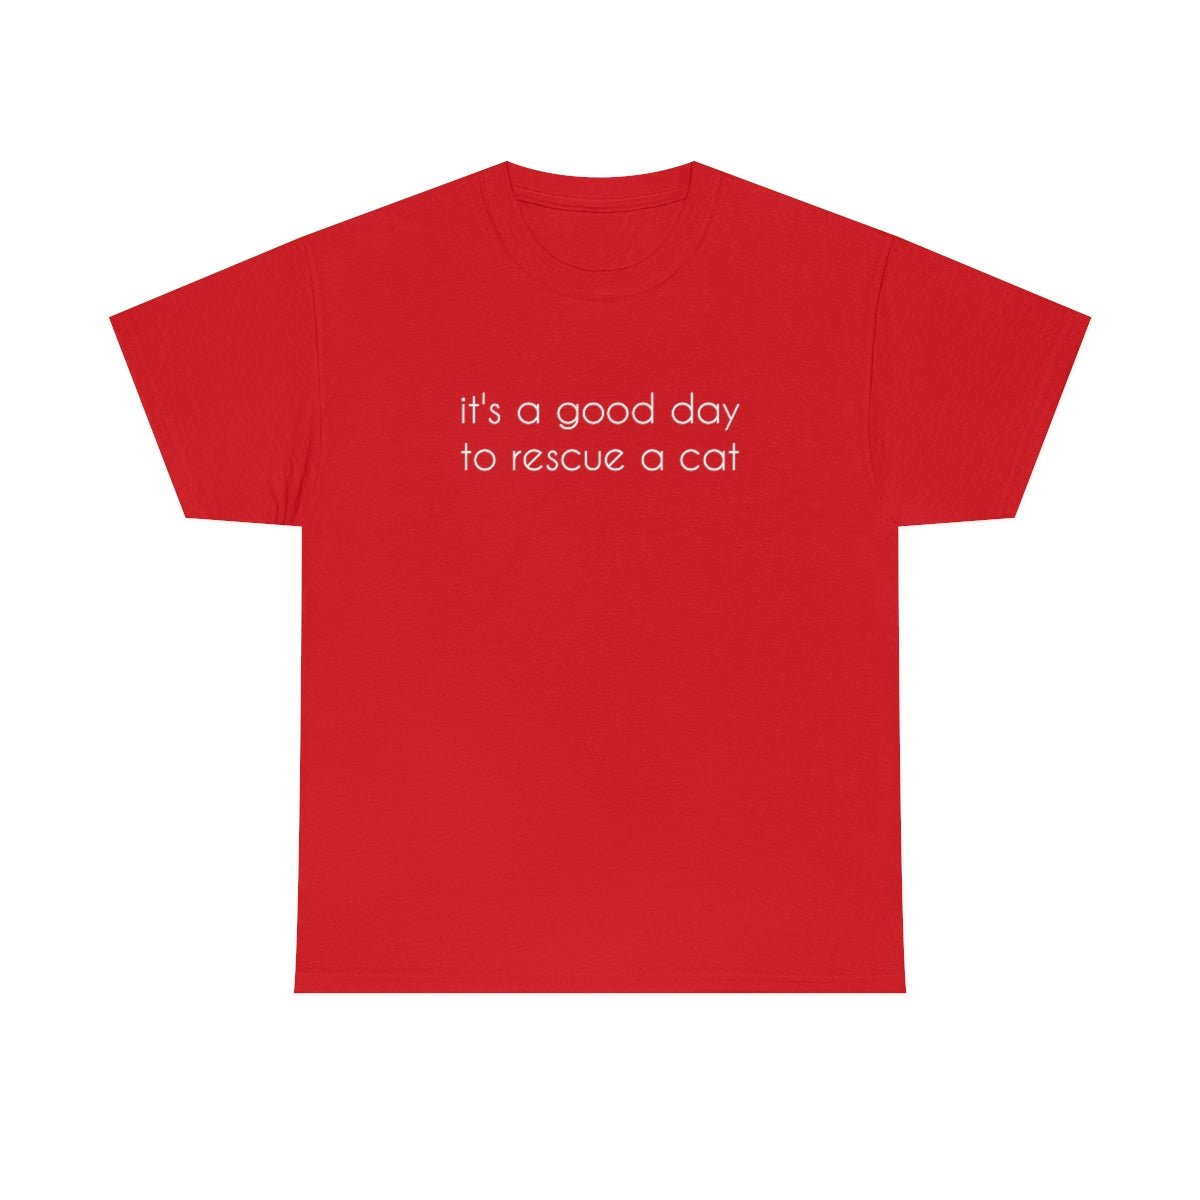 It's A Good Day To Rescue A Cat | Text Tees - Detezi Designs-26686834415761394402